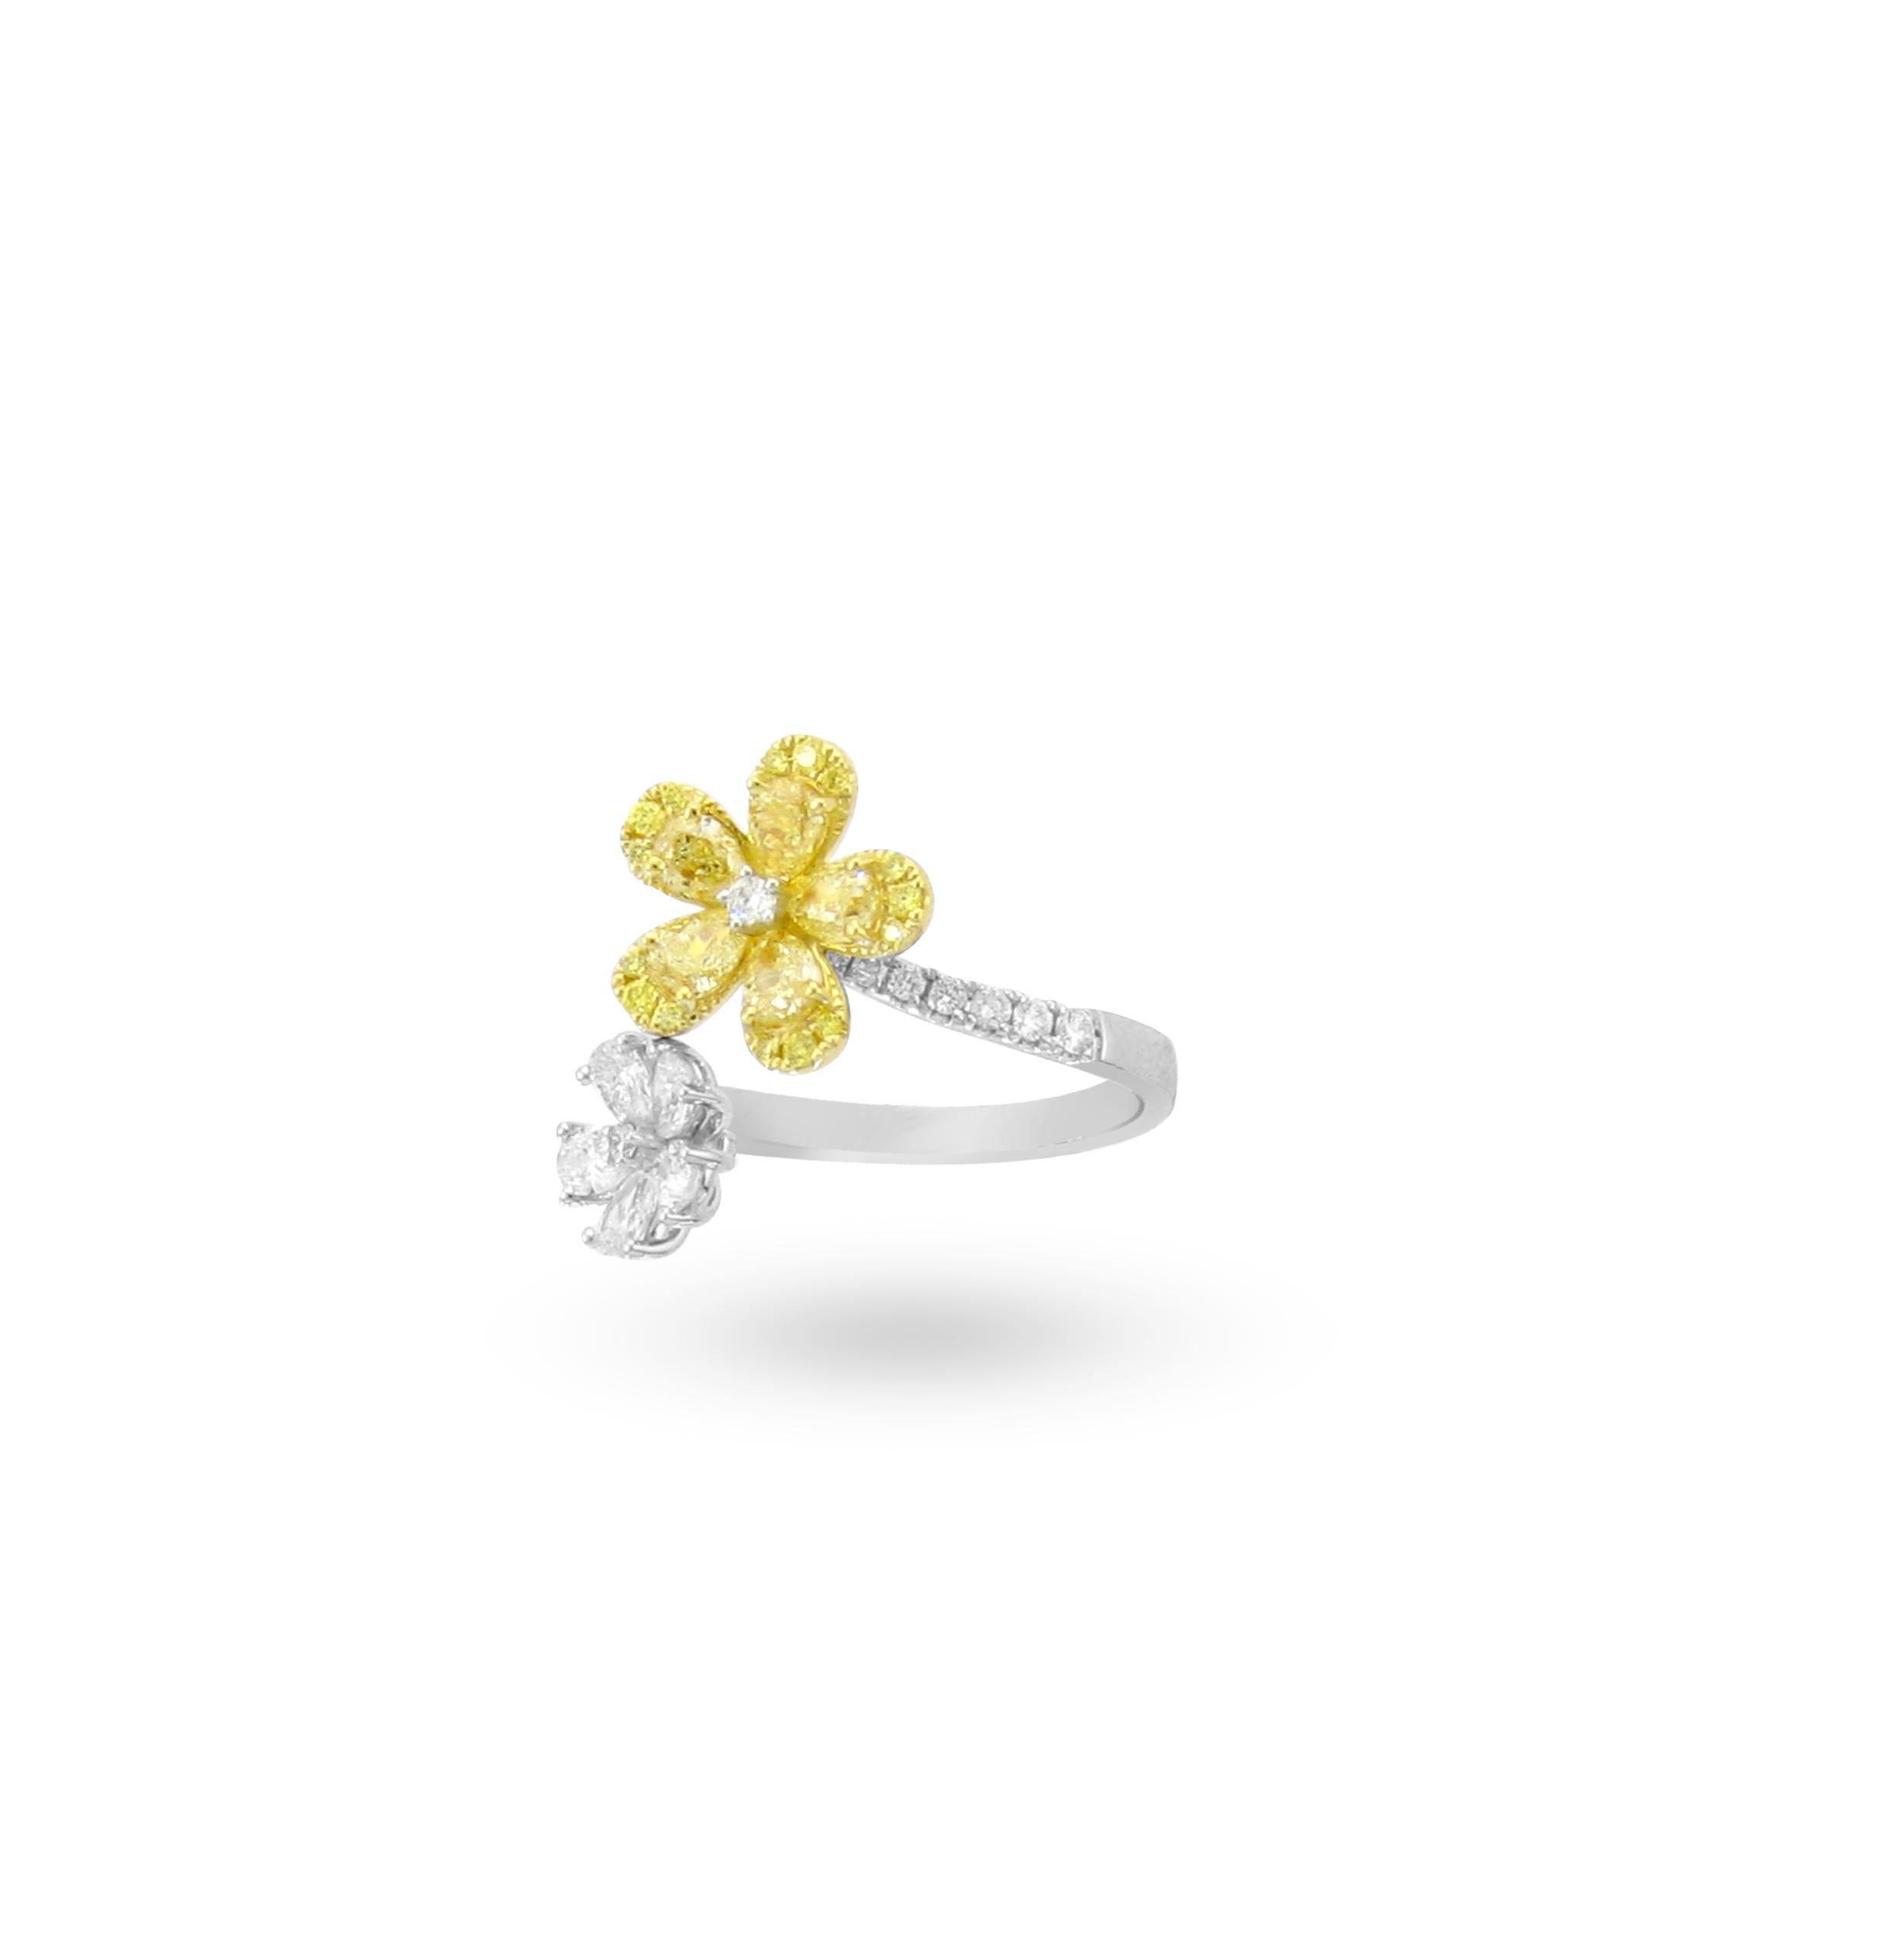 From one of Bleau NY's most unique set, a Bypass Ring with Natural Yellow Diamonds and White Diamonds. Pear cuts and Round cuts.

Yellow Natural Diamonds - 1.00ct
White Diamonds - .72ct
Ring Metal - 18kyw
Tag #12020